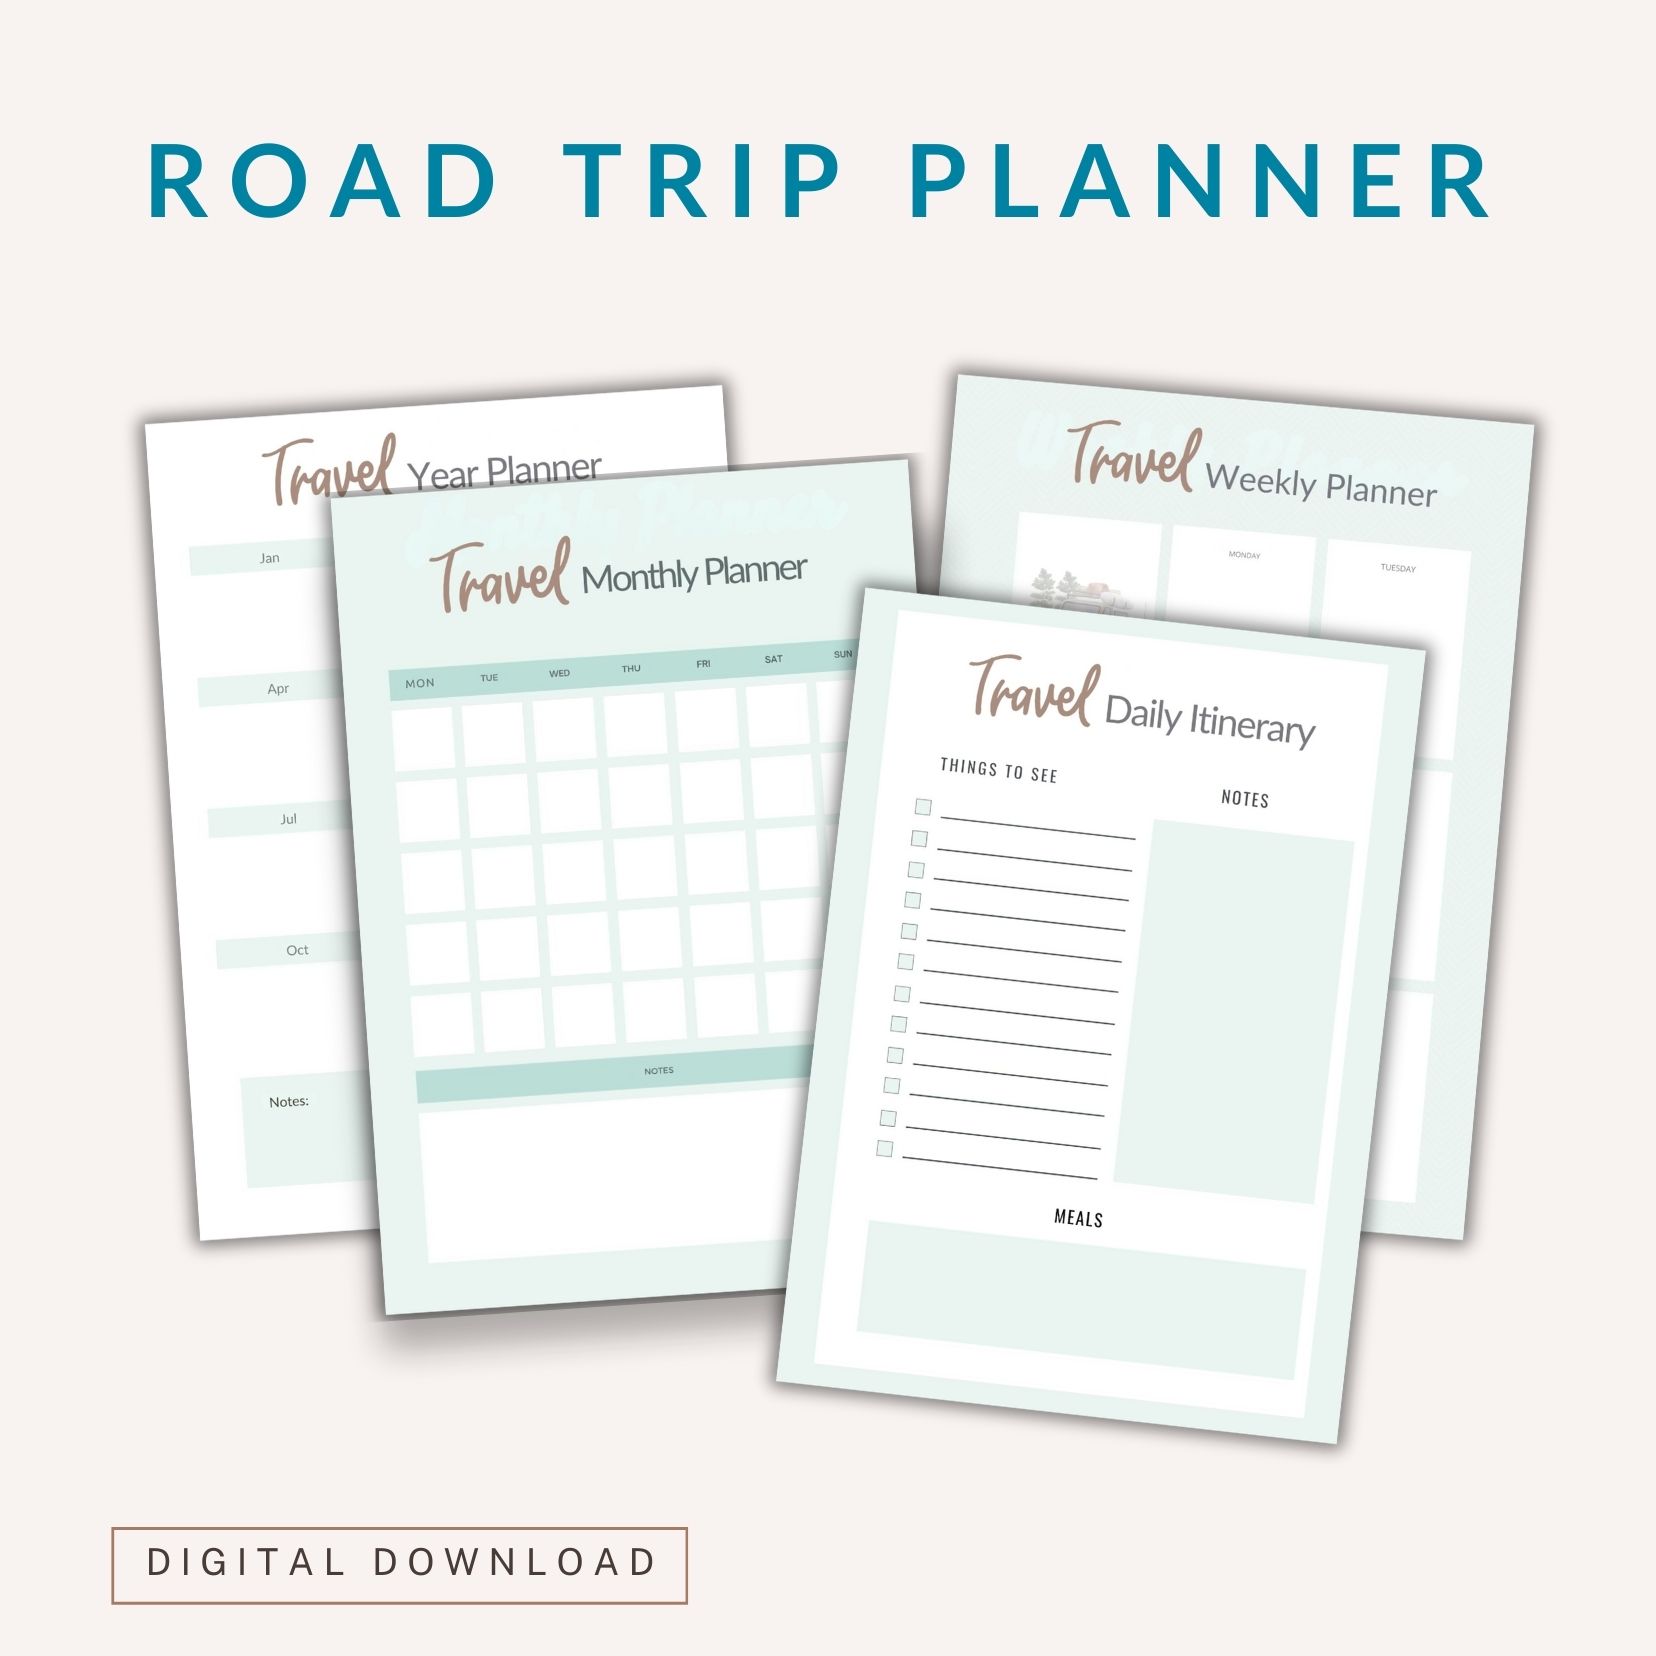 4 road trip planner pages